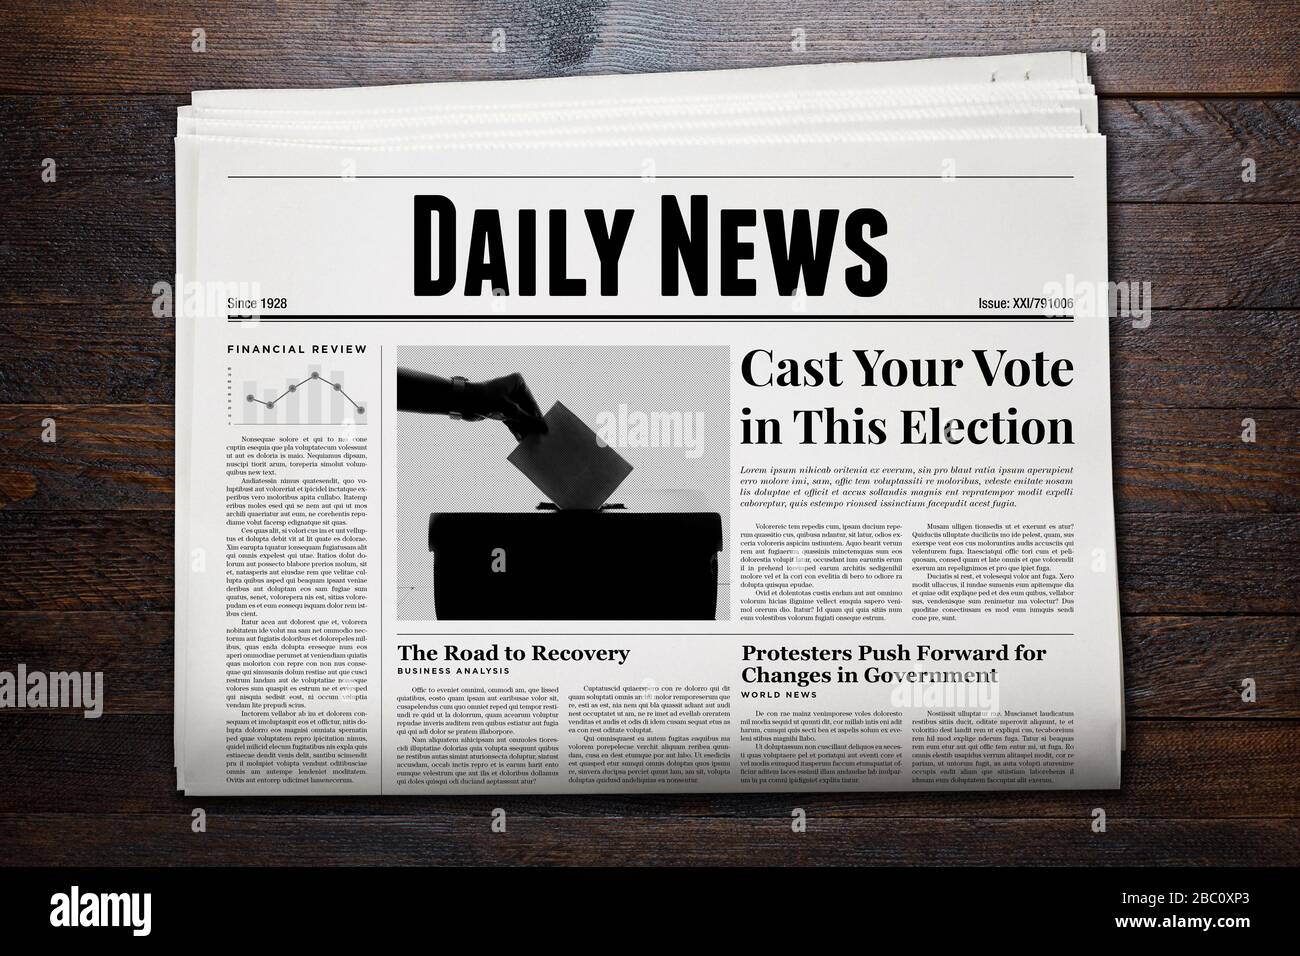 Presidential election news on daily newspaper. Stock Photo